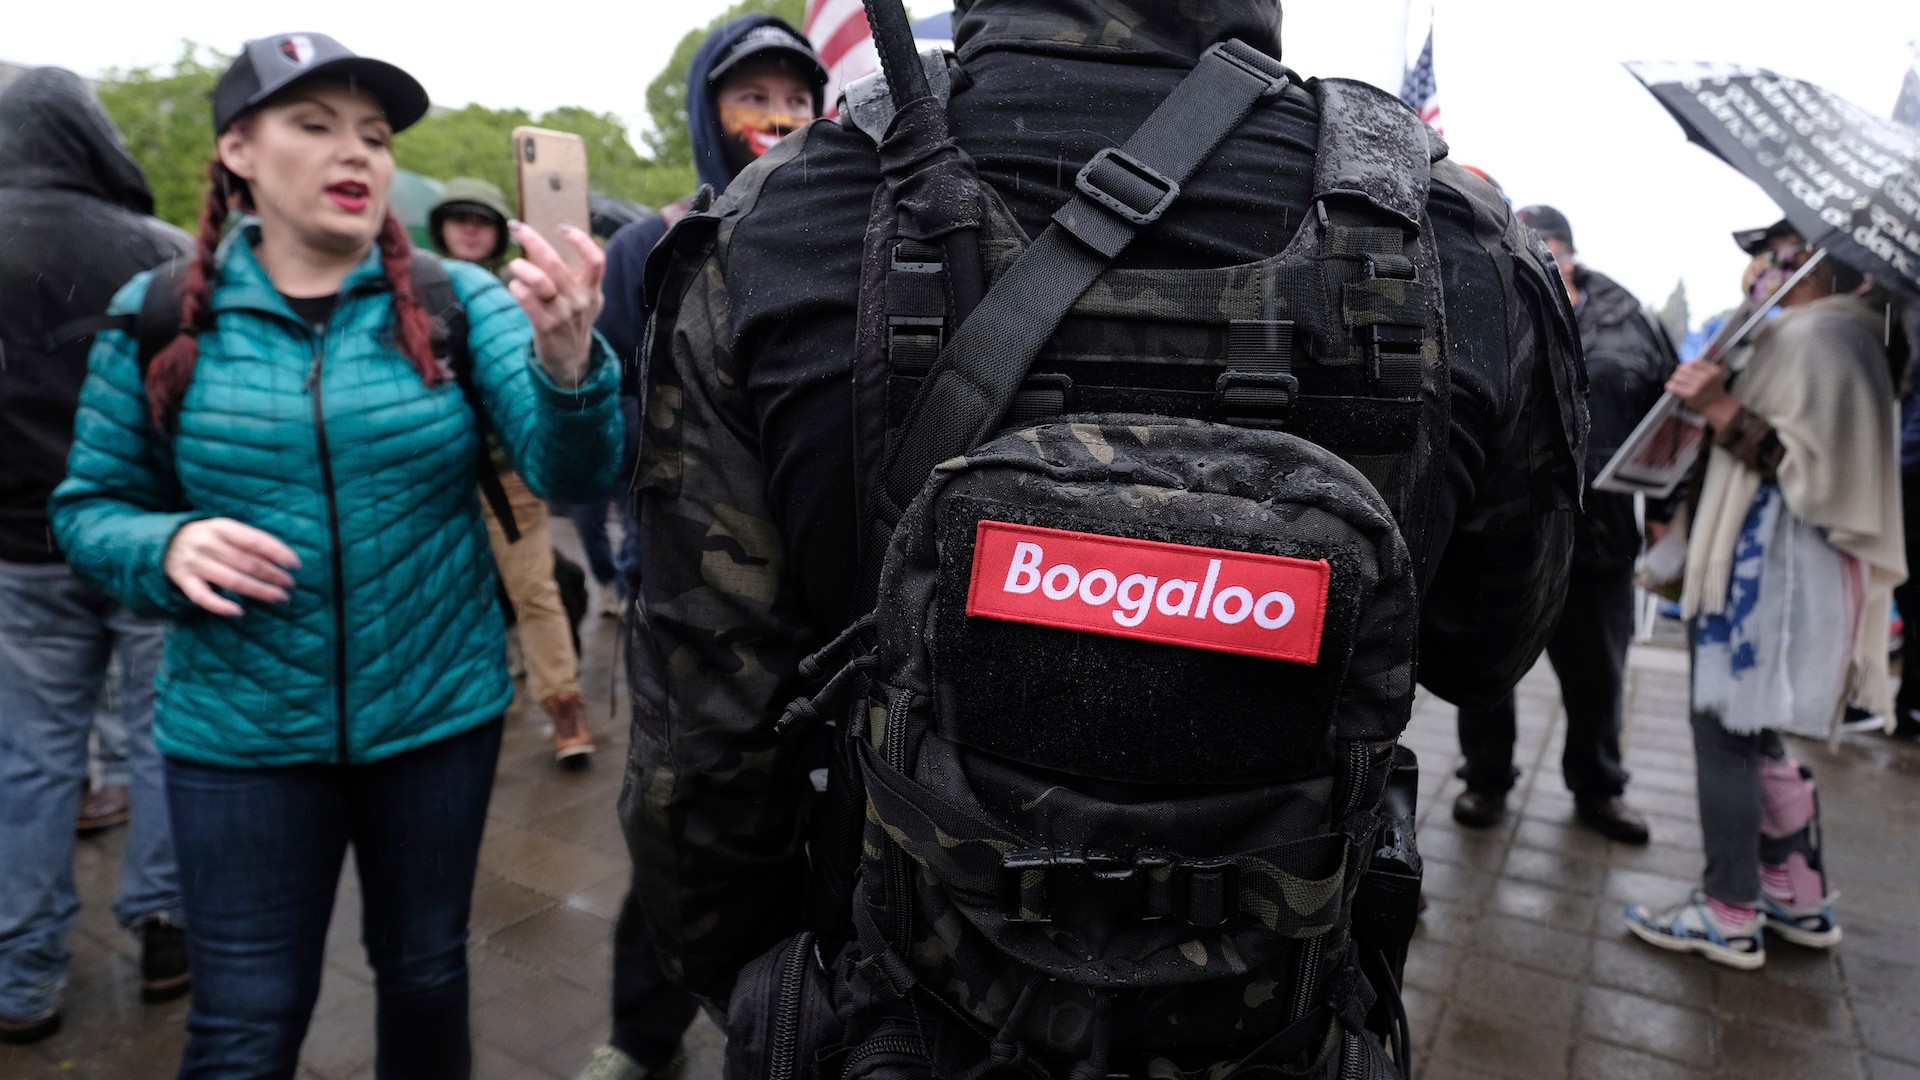 Congress Just Got An Earful About The Threat Of The Boogaloo Movement